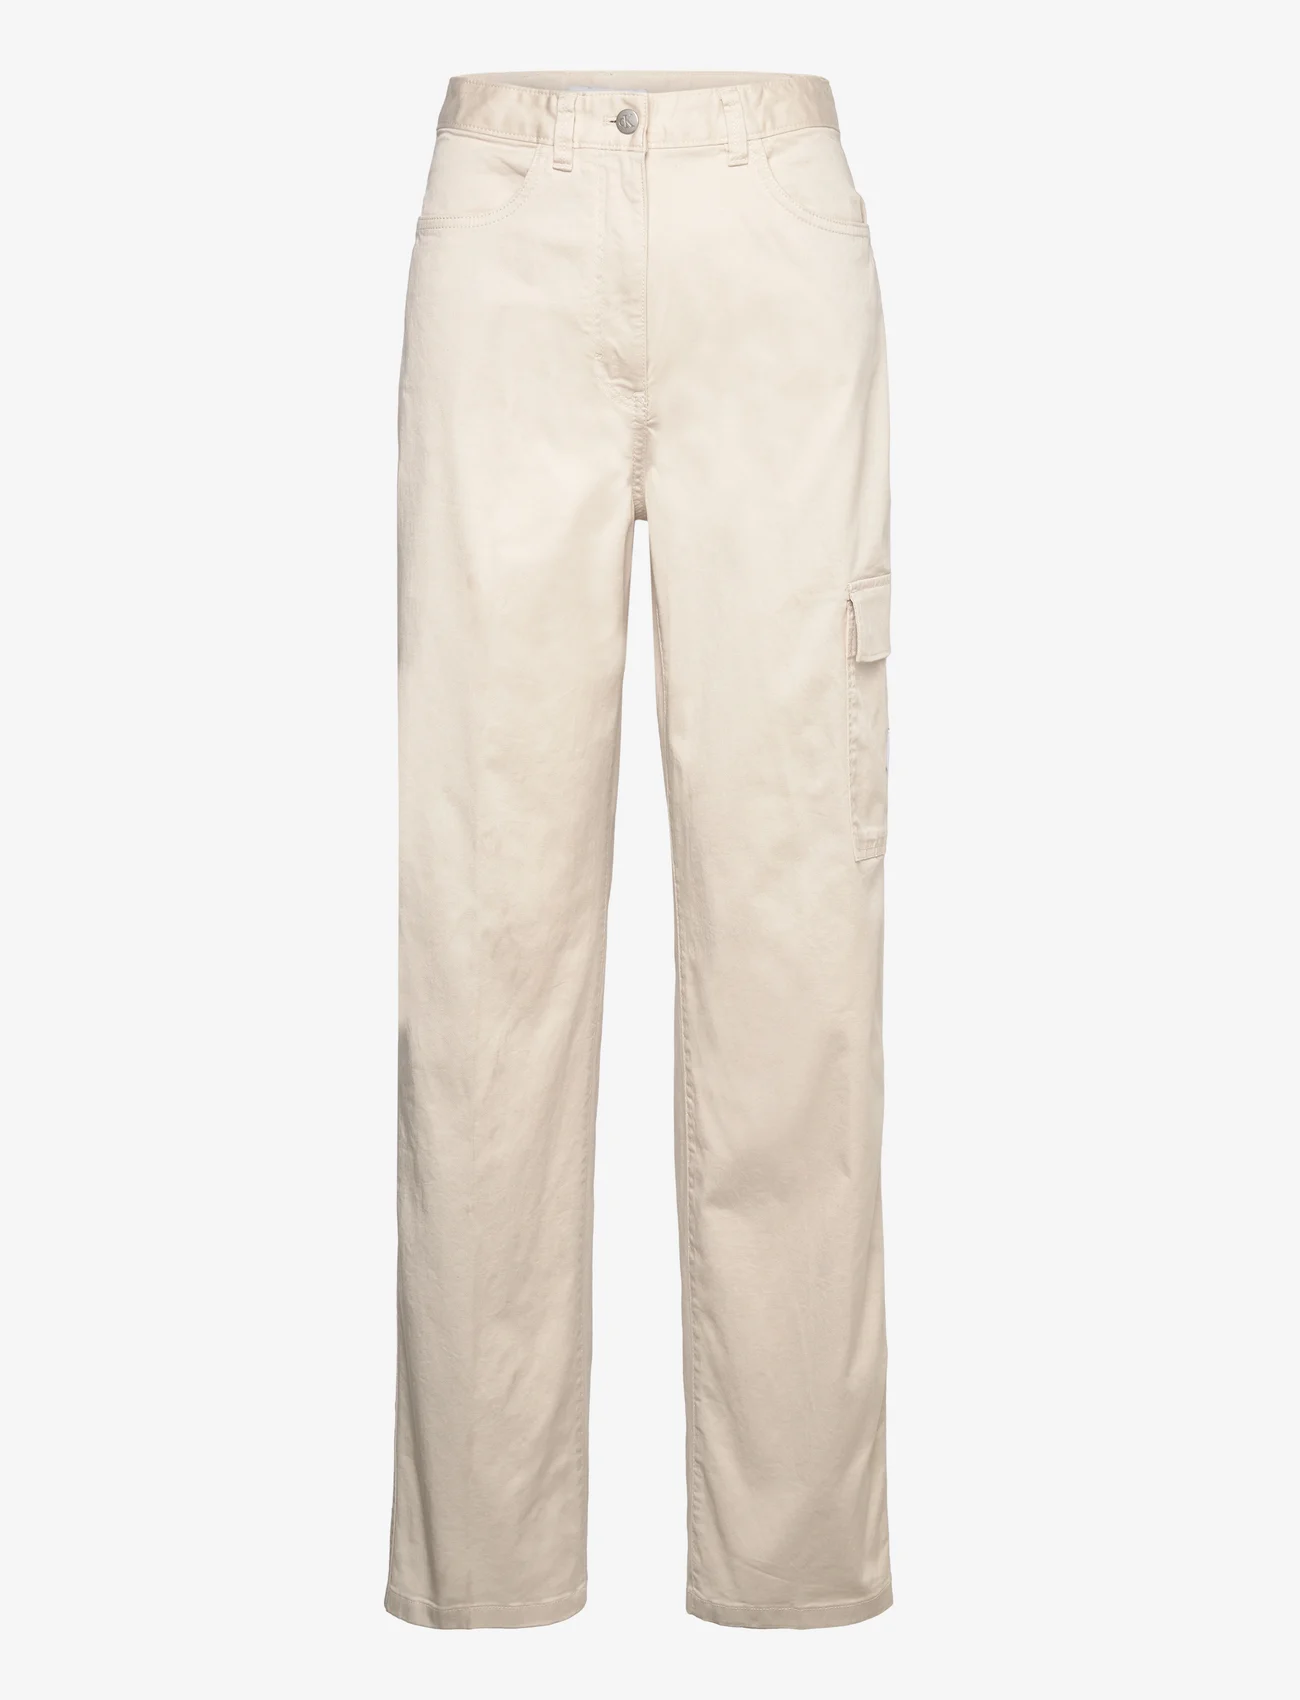 Calvin Klein Jeans - STRETCH TWILL HIGH RISE STRAIGHT - cargo pants - eggshell - 0